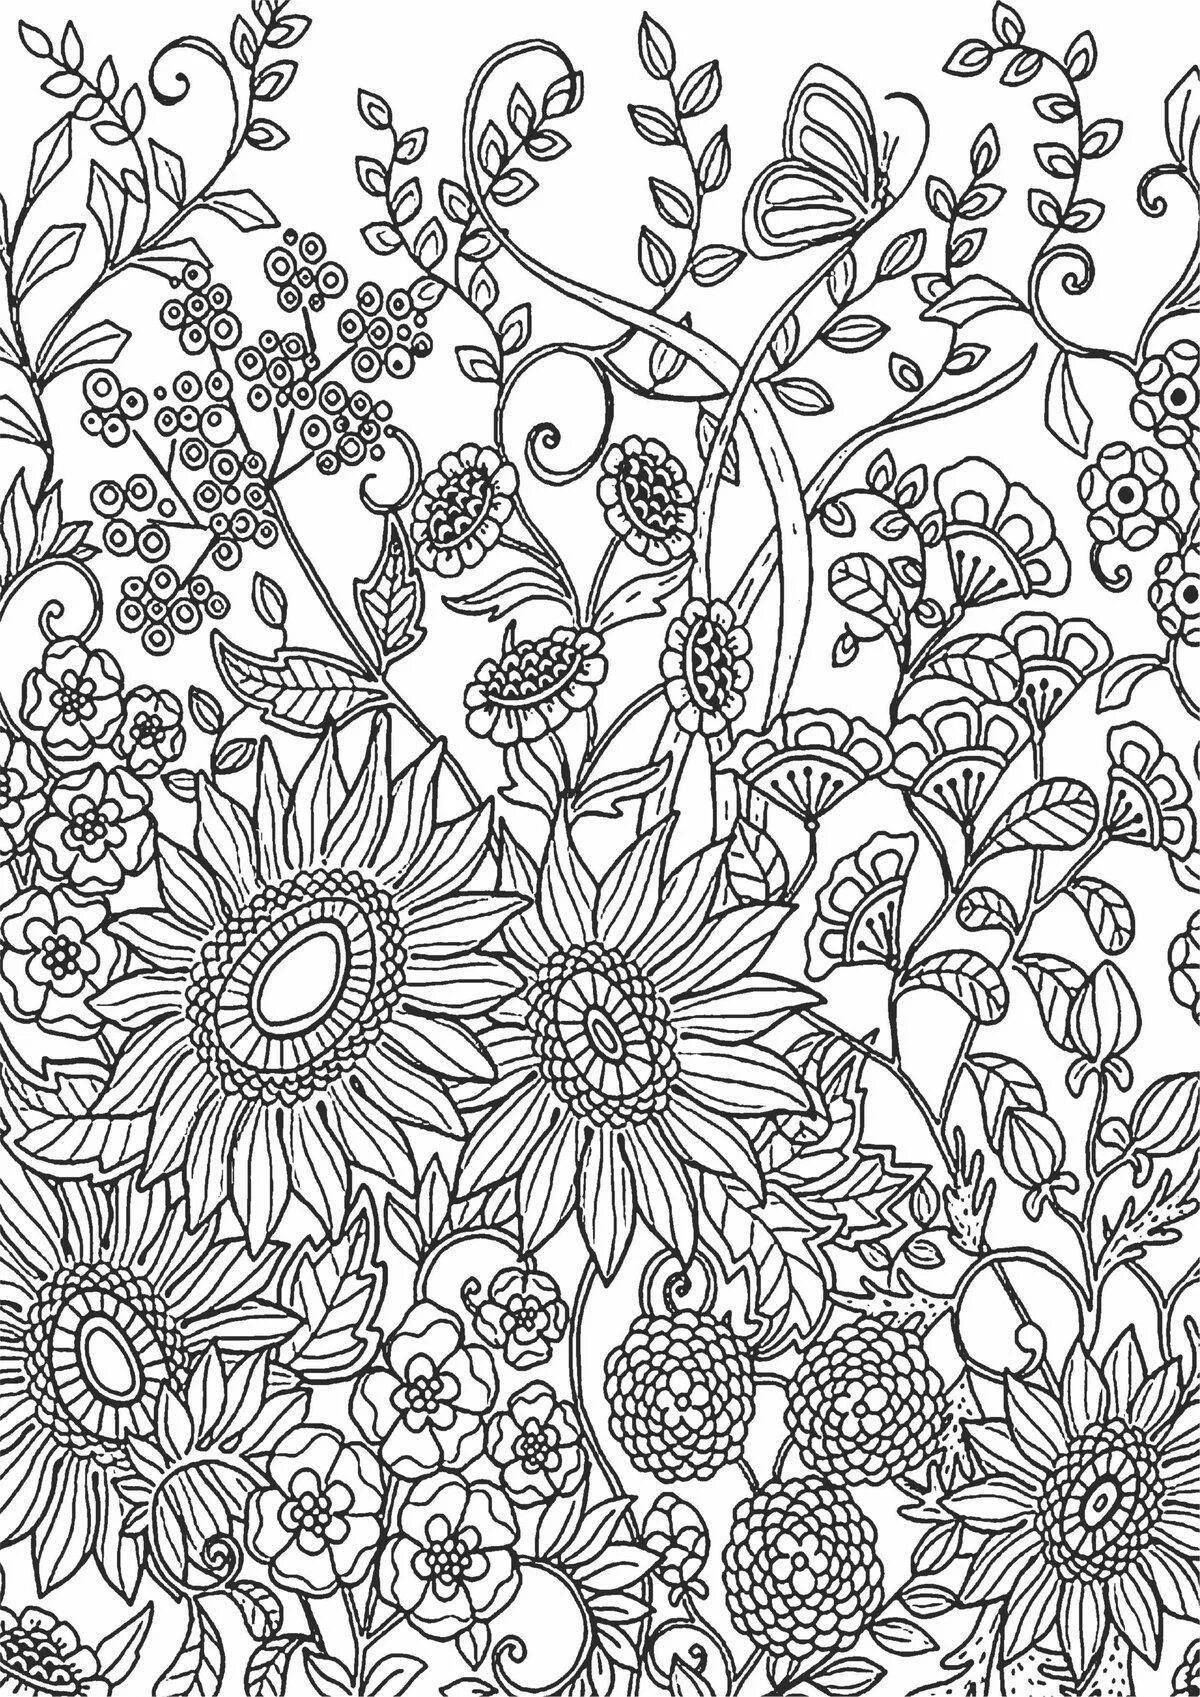 Intriguing adult coloring pages